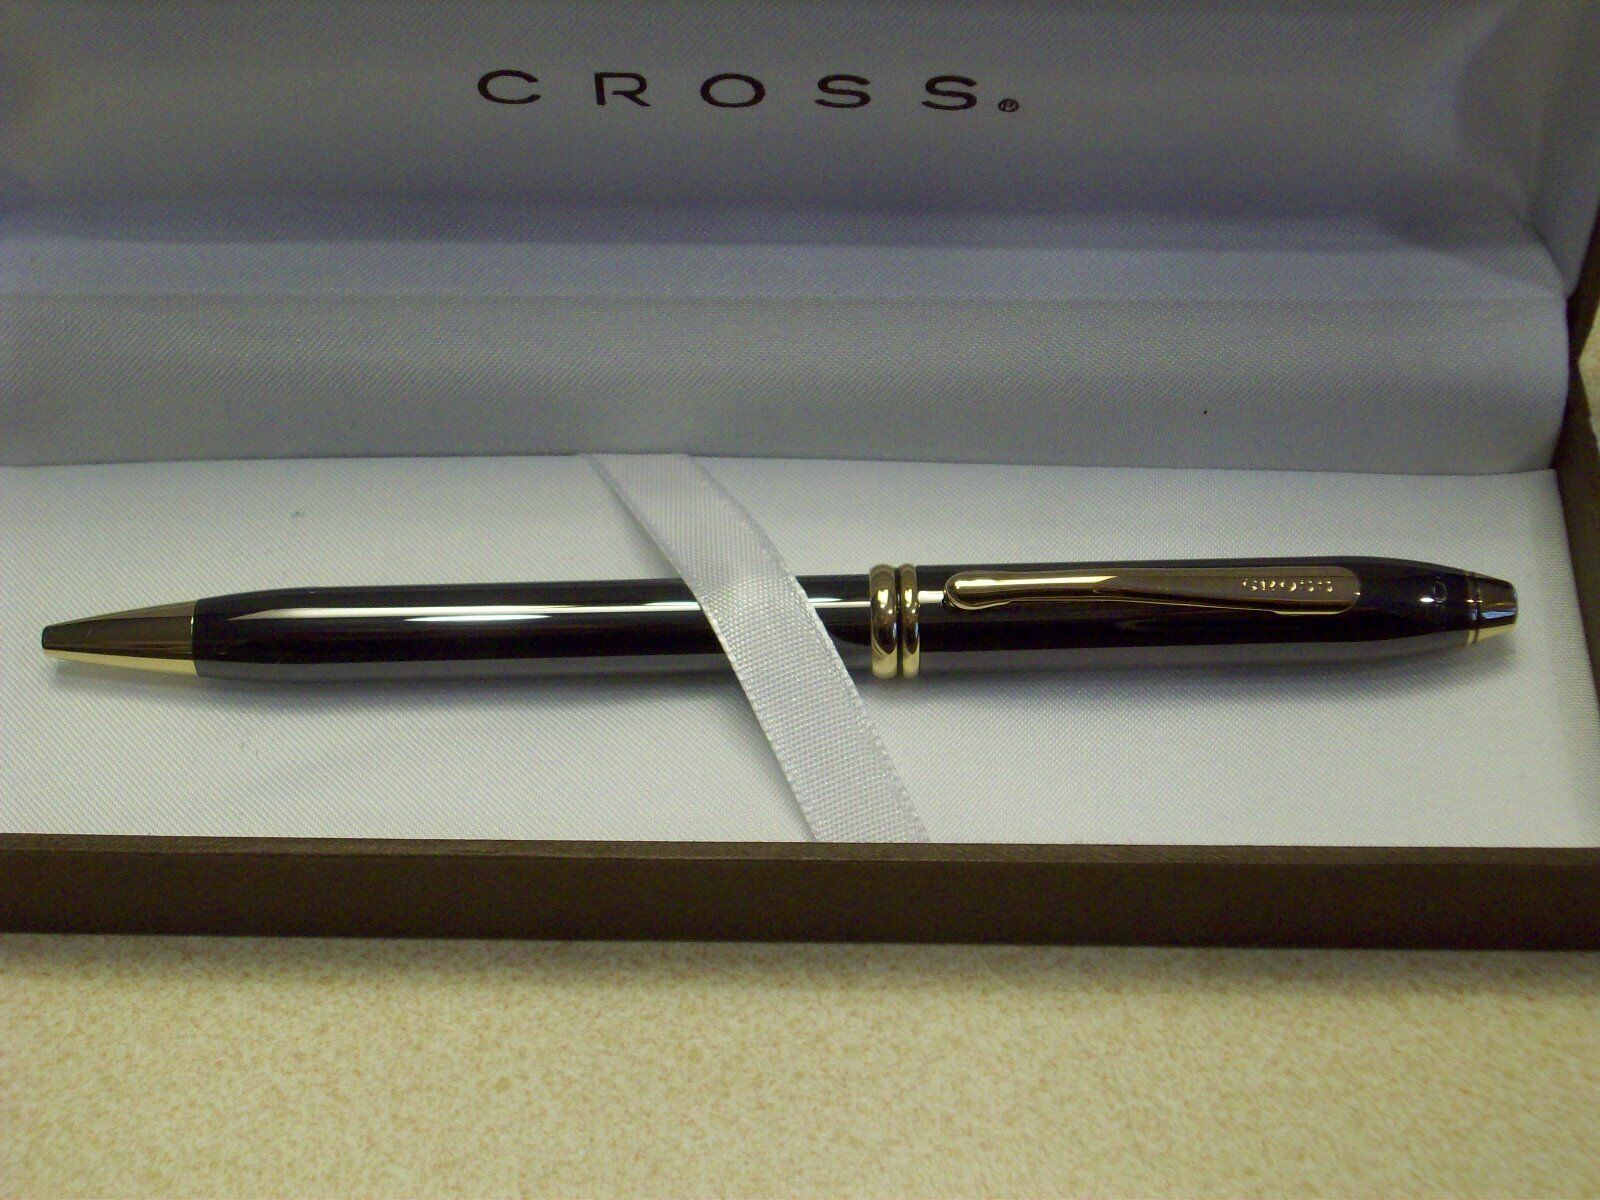 CROSS TOWNSEND BALLPOINT PEN TITANIUM WITH 23K GOLD PLATED APPOINTMENTS